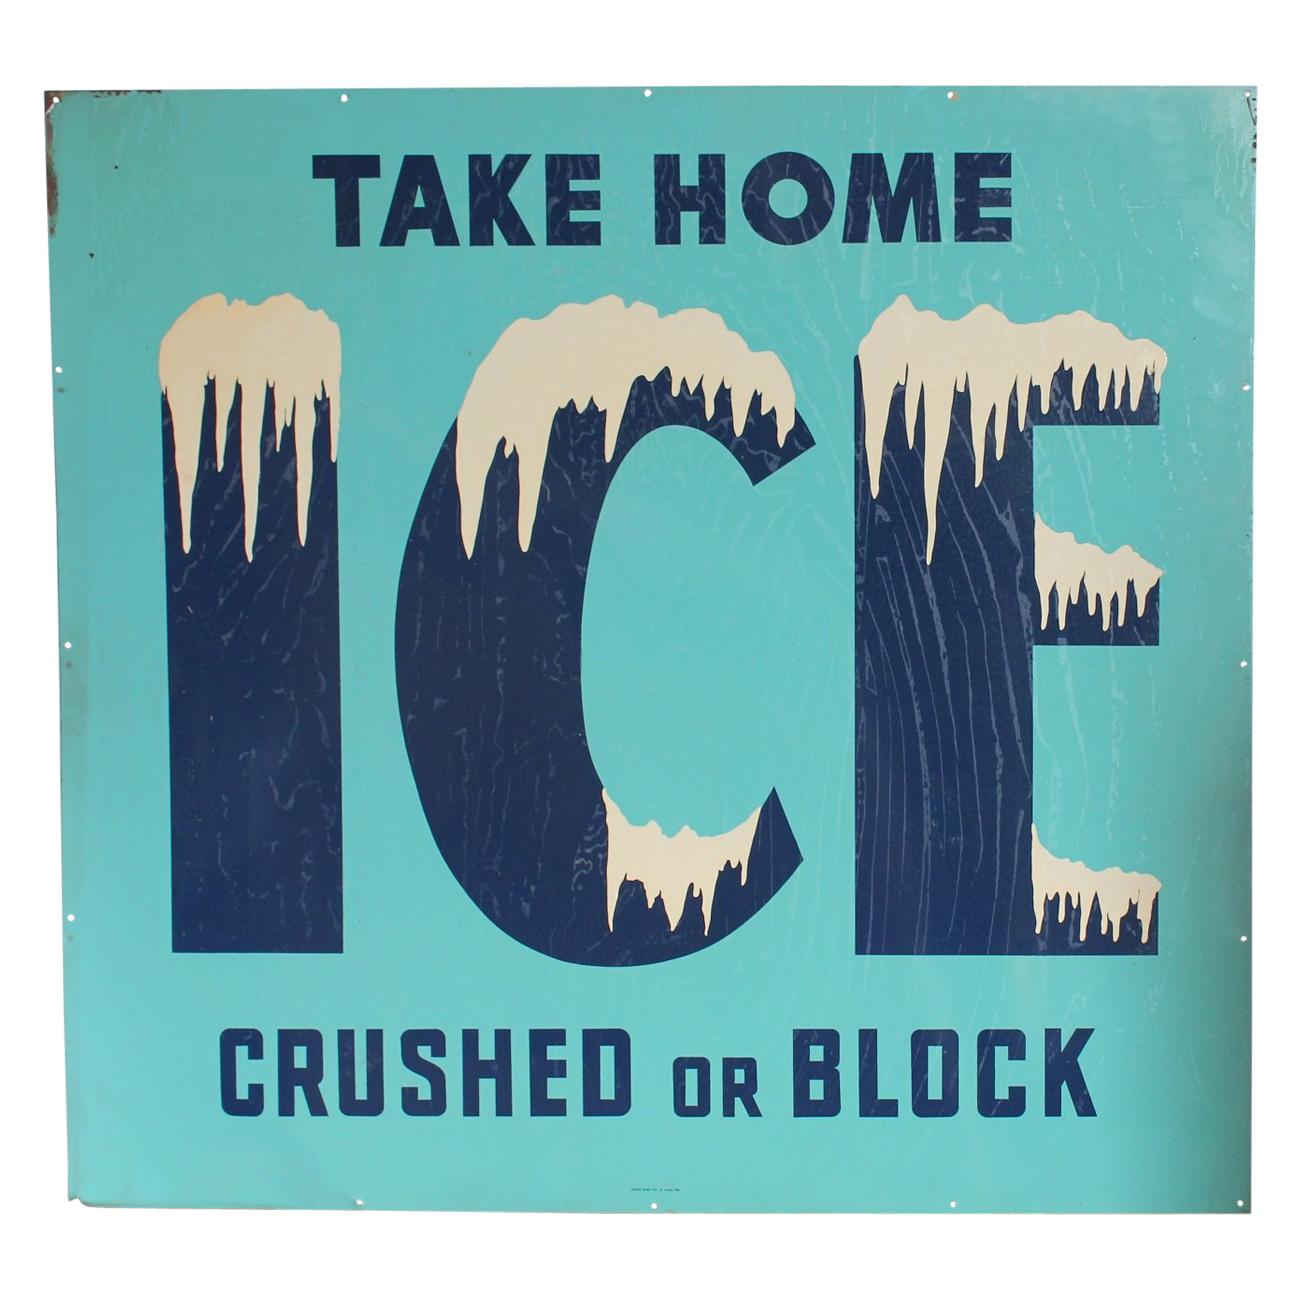 Large 1950s “Take Home Ice Crushed Or Block”